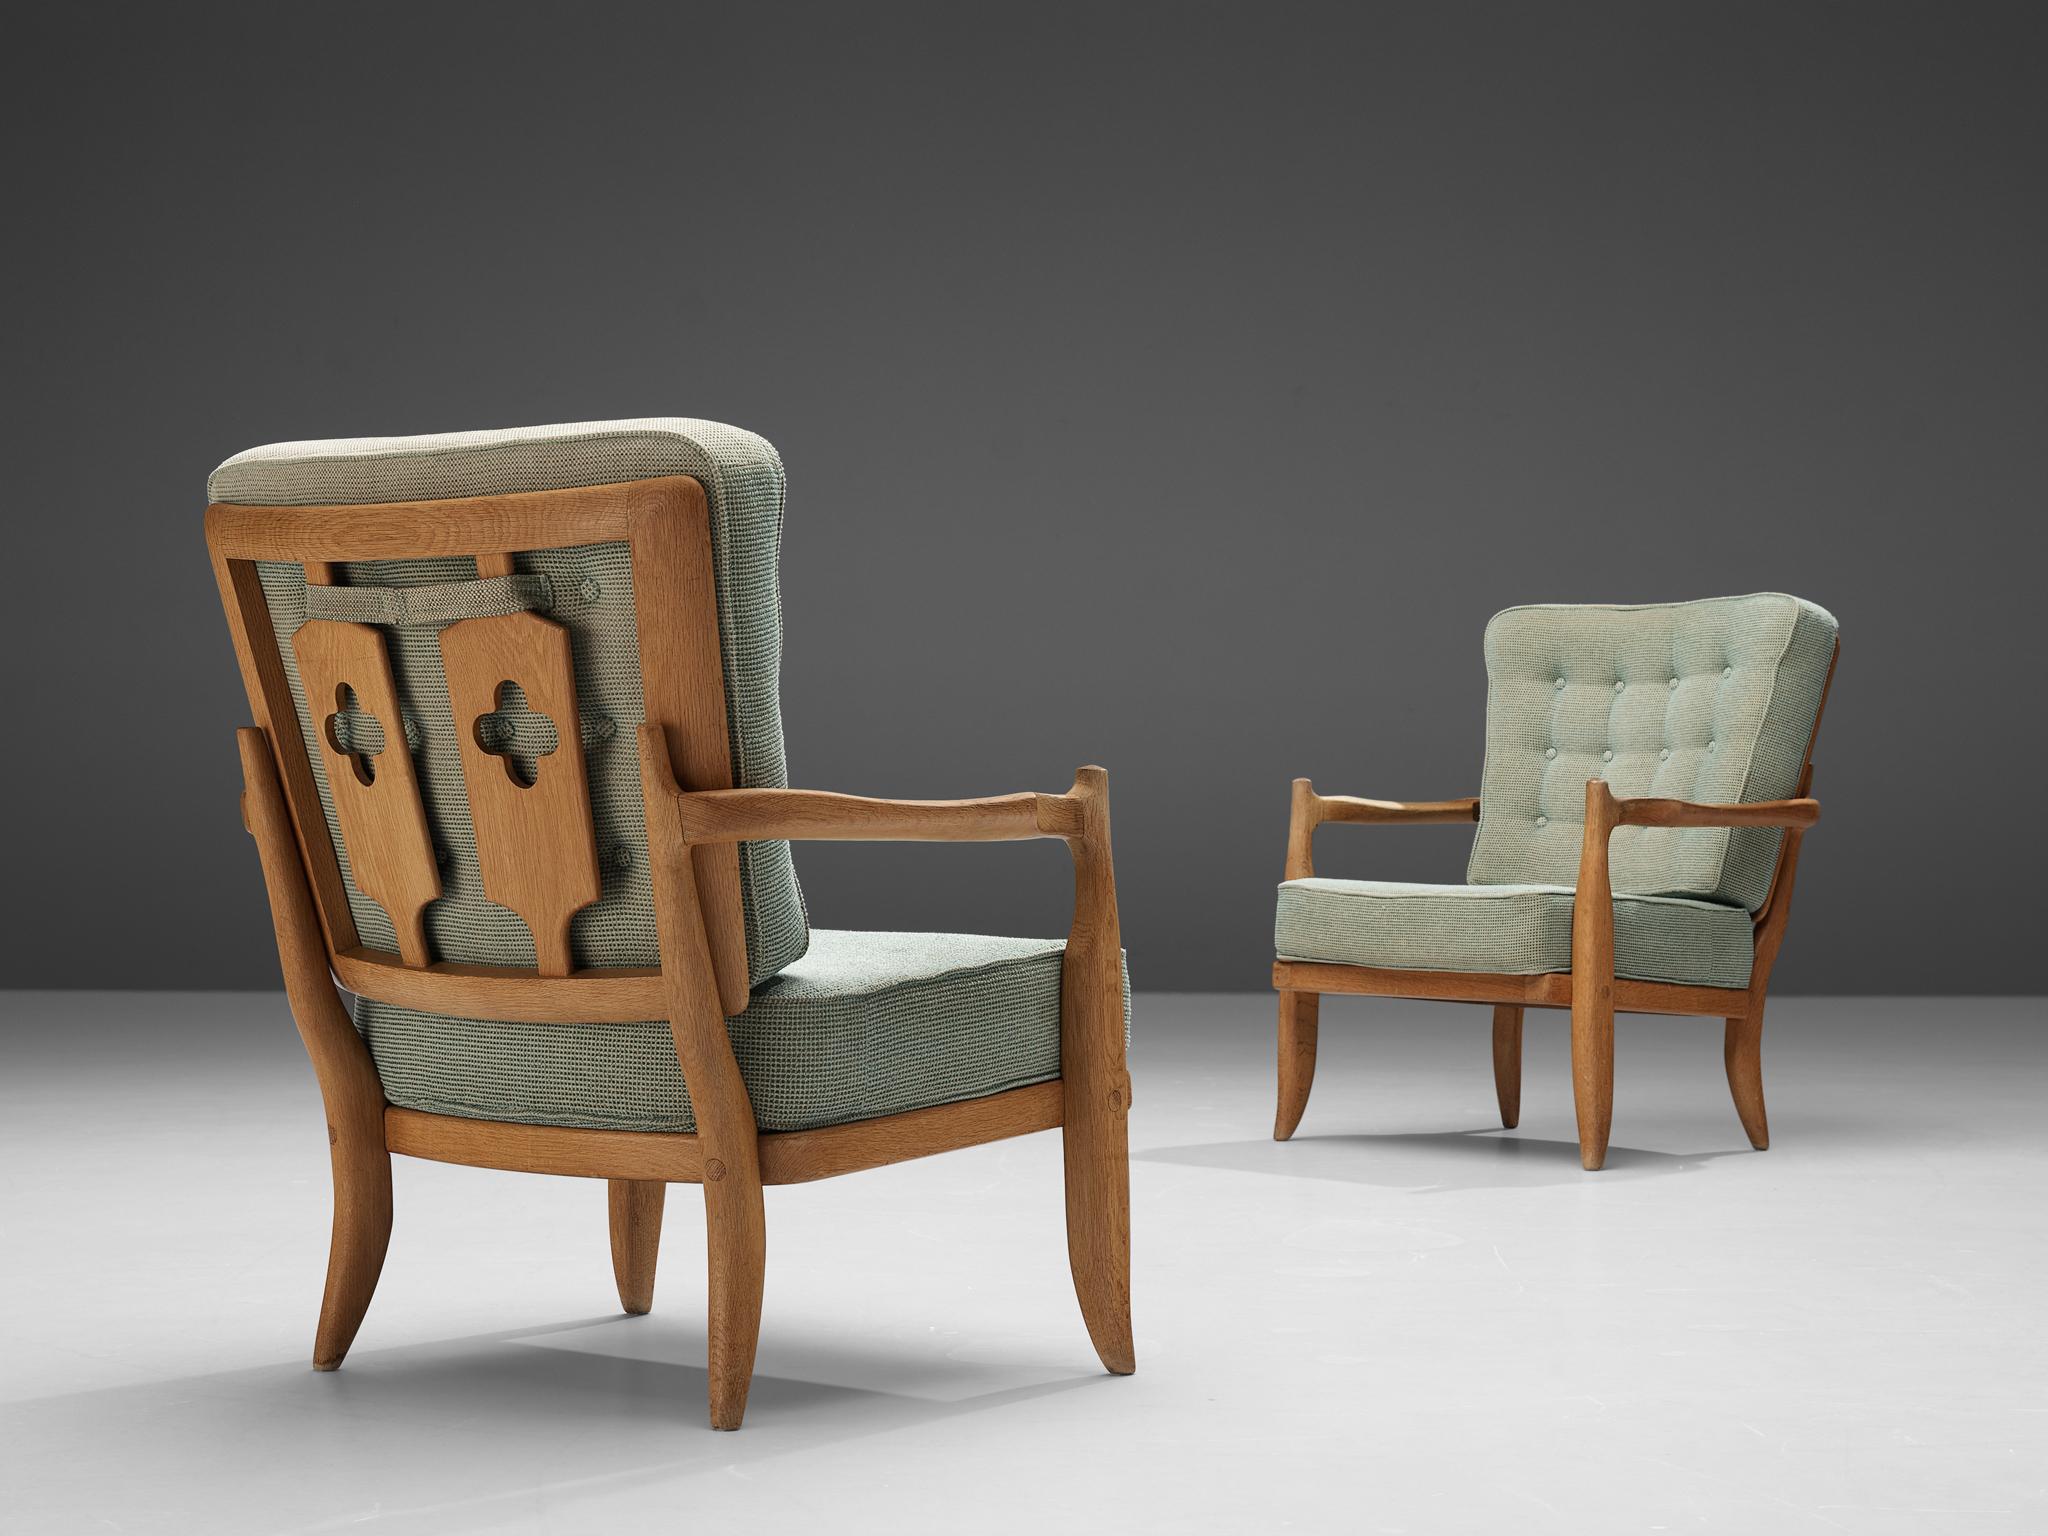 Set of two Guillerme et Chambron easy chairs, oak and green upholstery, France, 1950s

The seating as well as the backrest are made of comfortable cushions, upholstered in a warm green colored woolen fabric. Whereas the front convinces with its